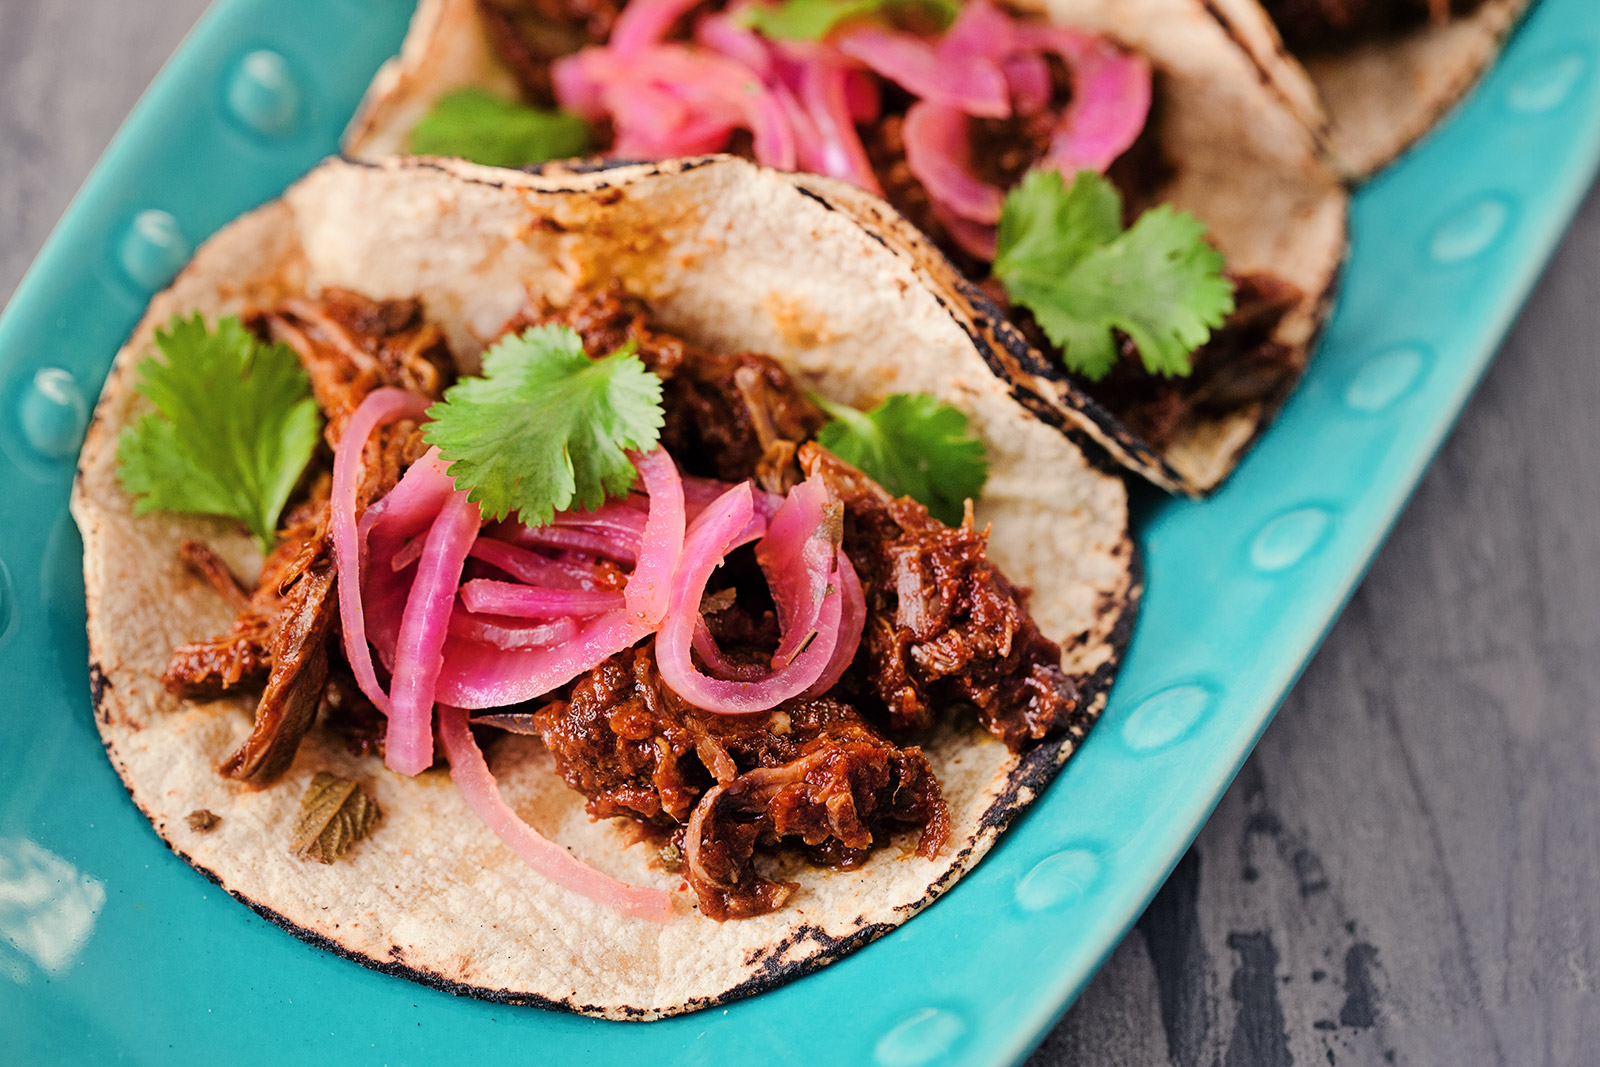 What to make with that leftover adobo? Braised Beef Tacos